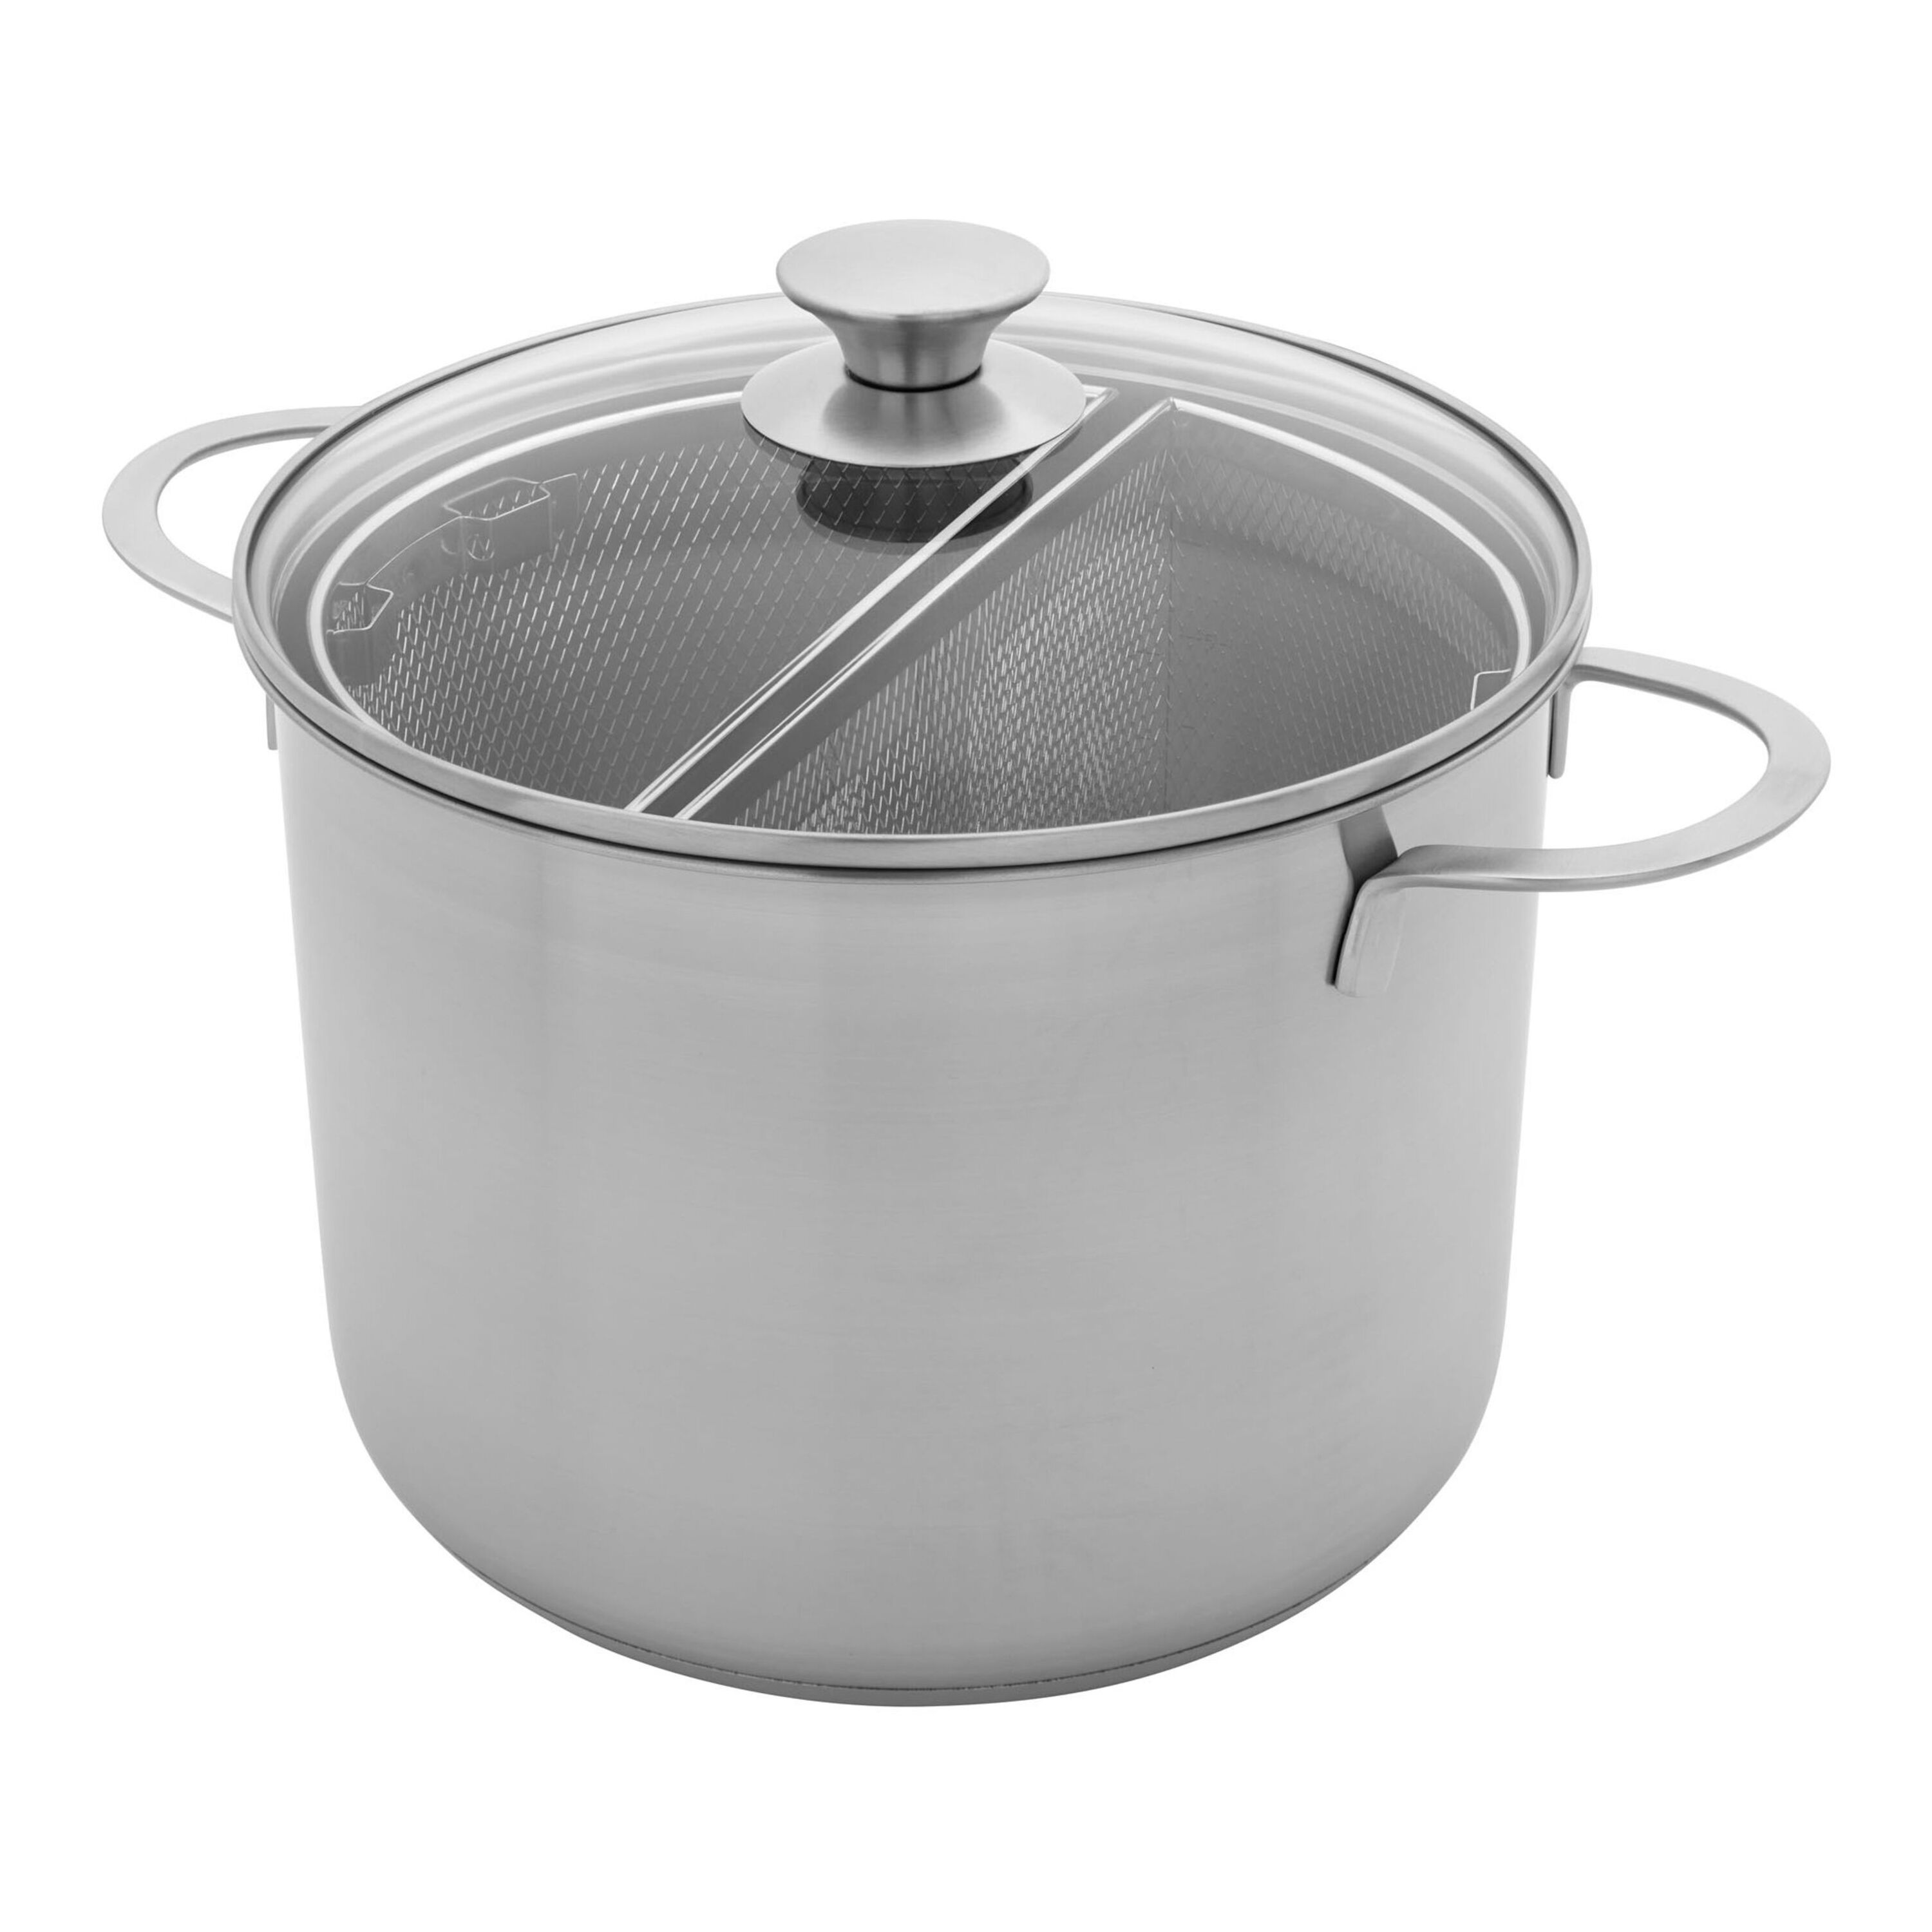 Wholesale YUTAI 304 stainless steel hammered saucepan with